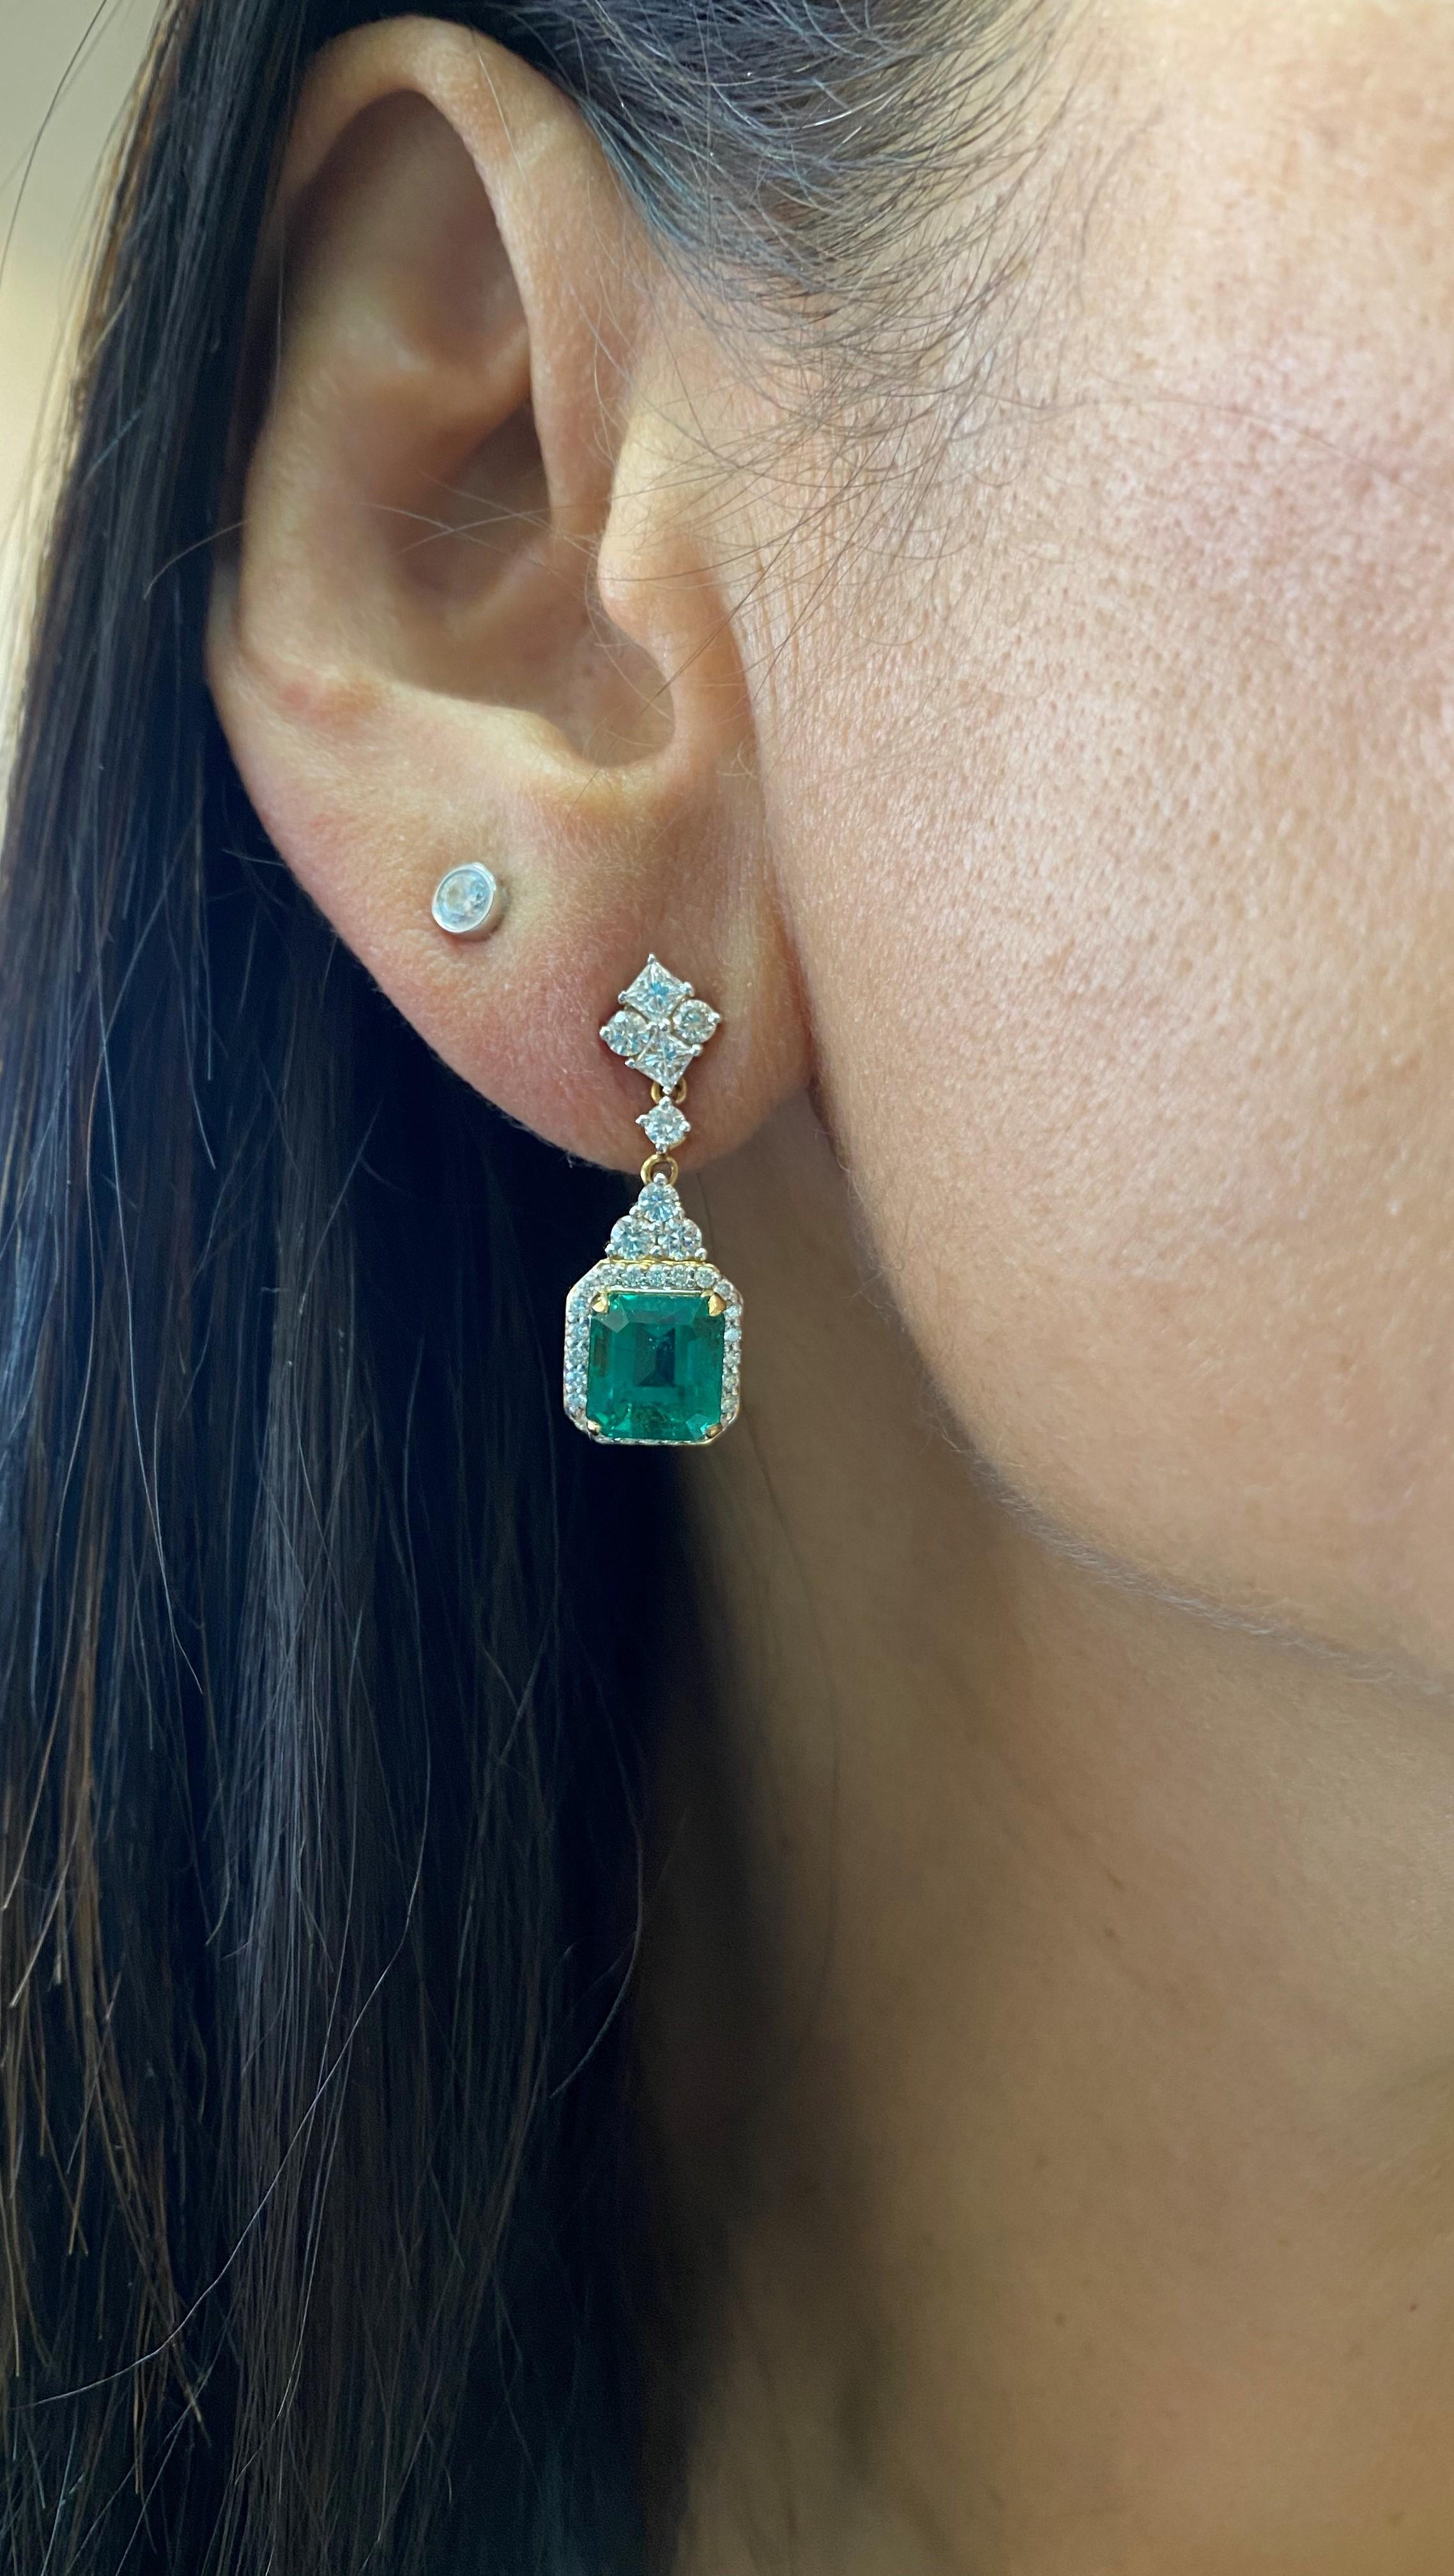 Regalia Collection - This collection is an ode to the magnificence which adorns the outfits of royals and evening gowns of Hollywood celebrities. Featuring the finest Colombian and Zambian emeralds with diamonds, this collection is timeless and can